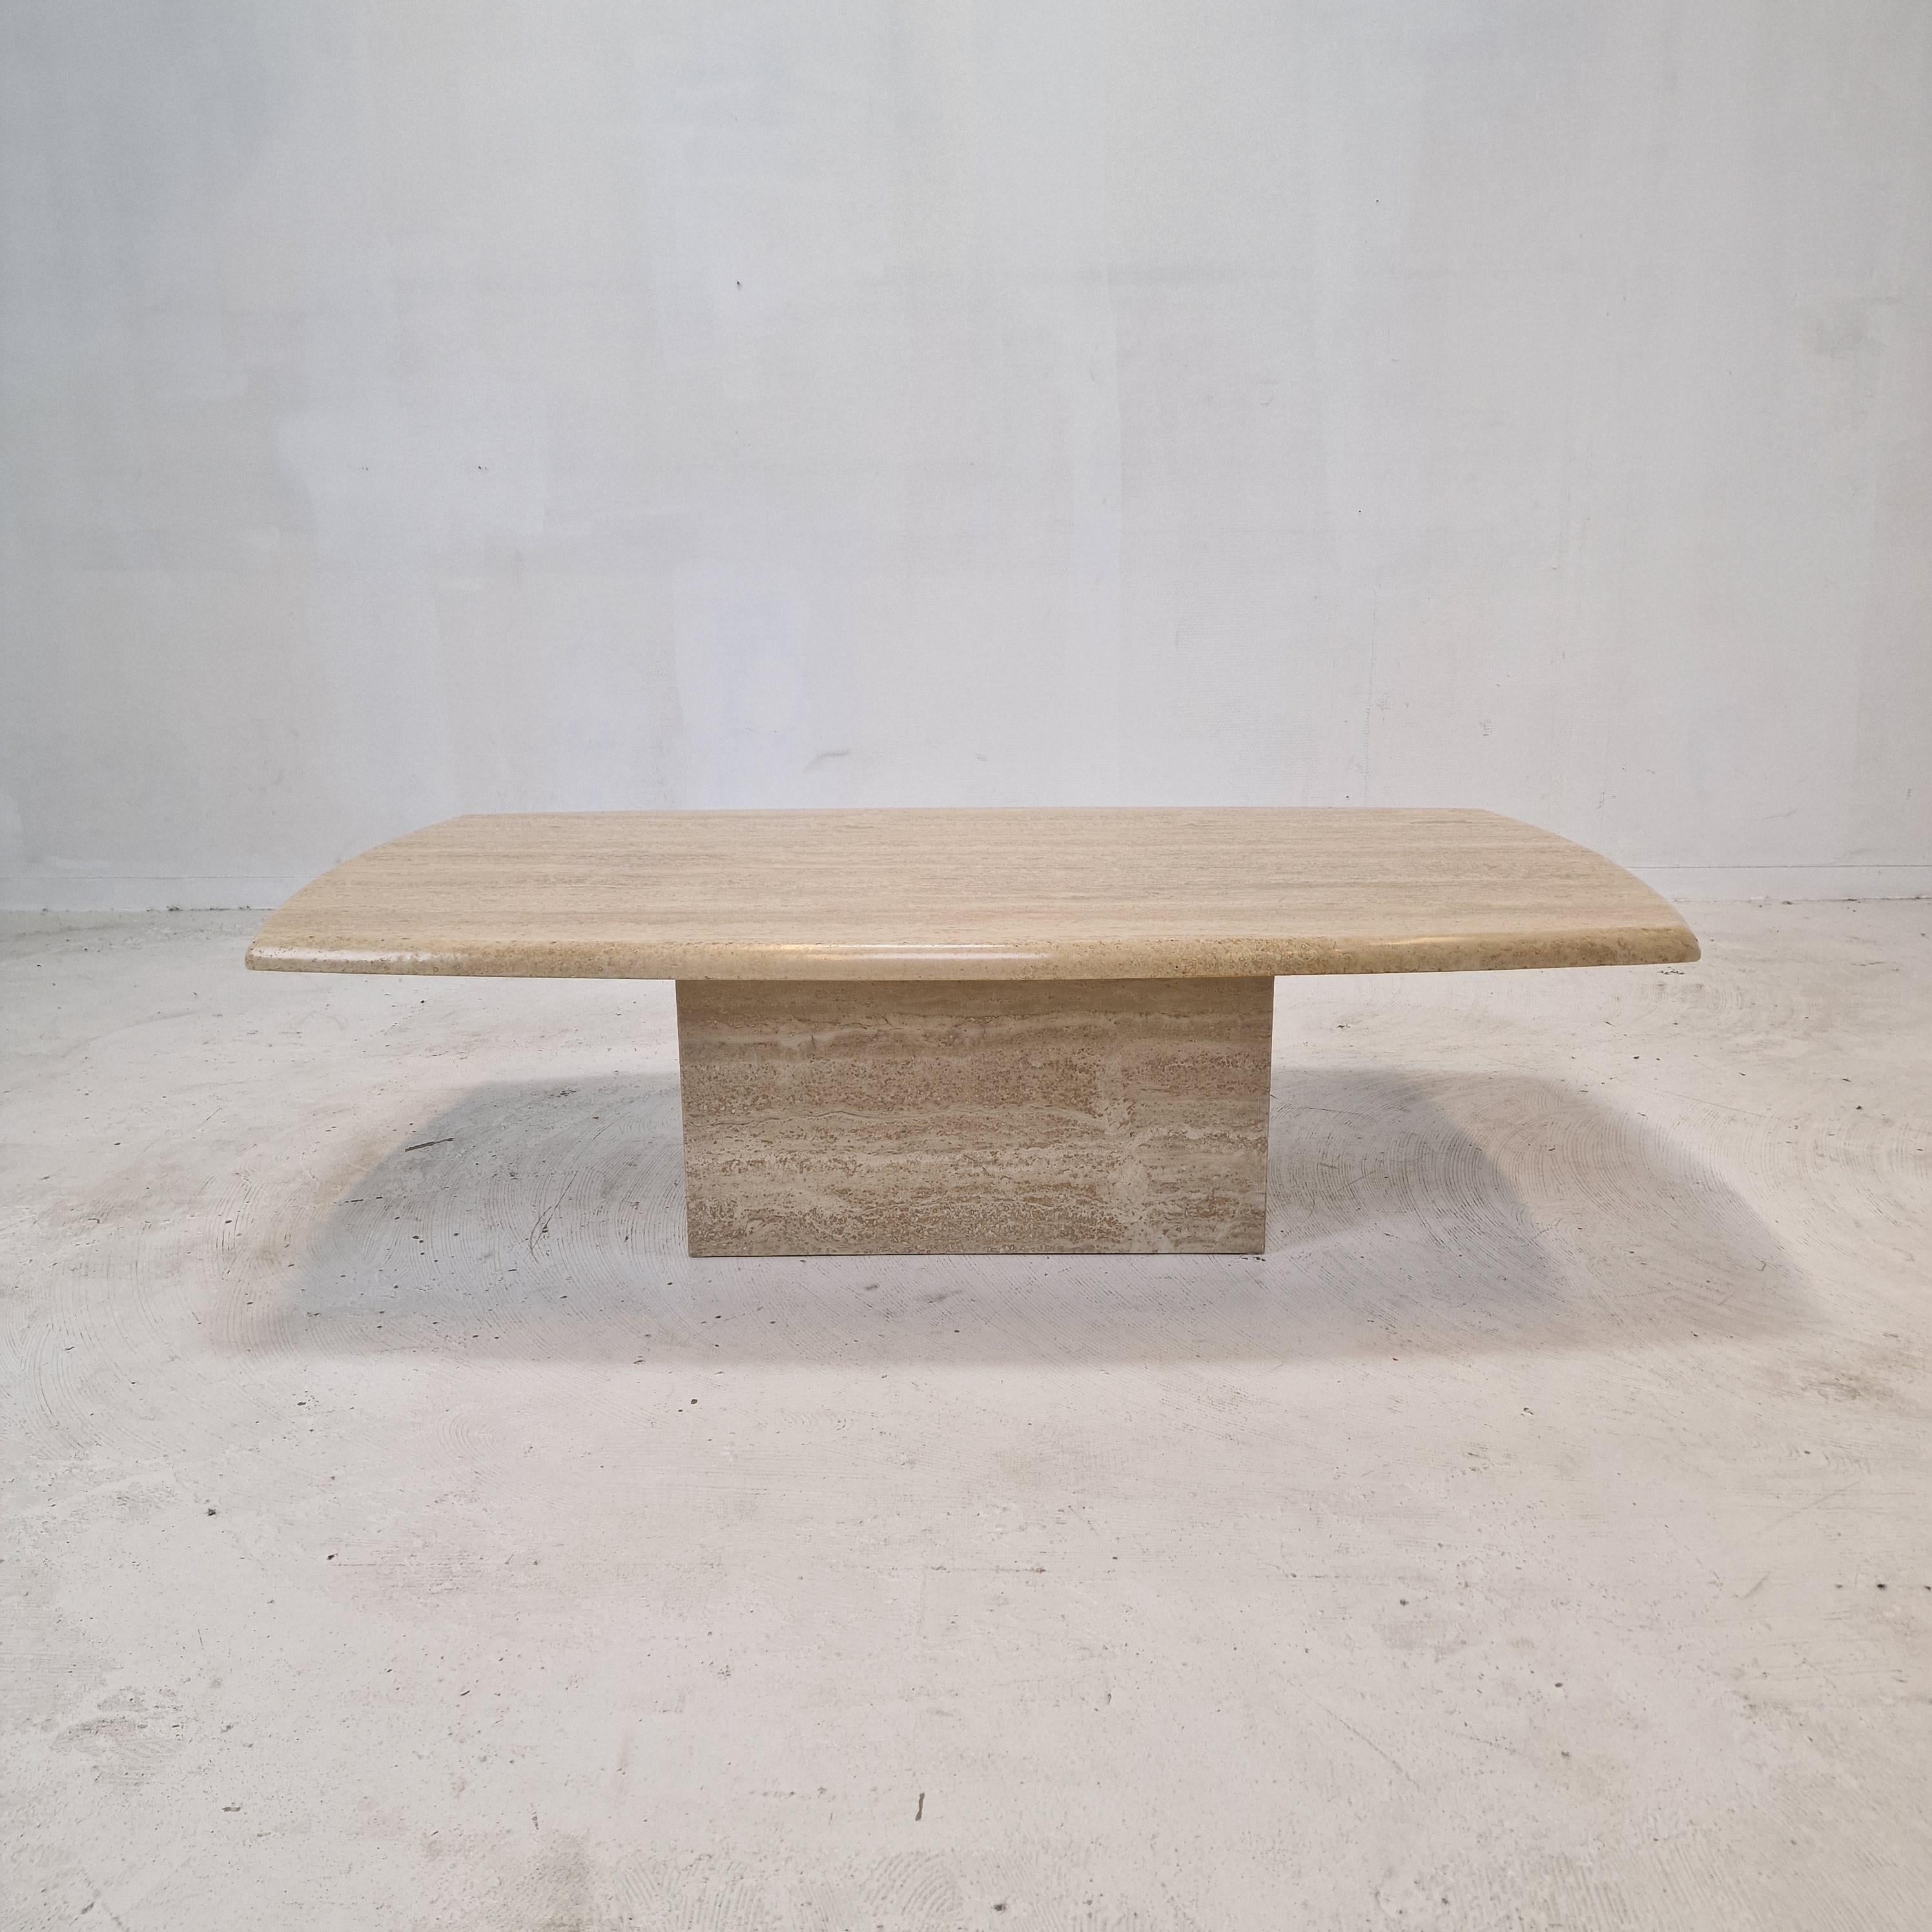 Very nice Italian coffee or side table handcrafted out of travertine, 1980s.

The rectangle top is rounded on the edge. 
It is made of beautiful travertine.
Please take notice of the very nice patterns.

It has the normal traces of use, see